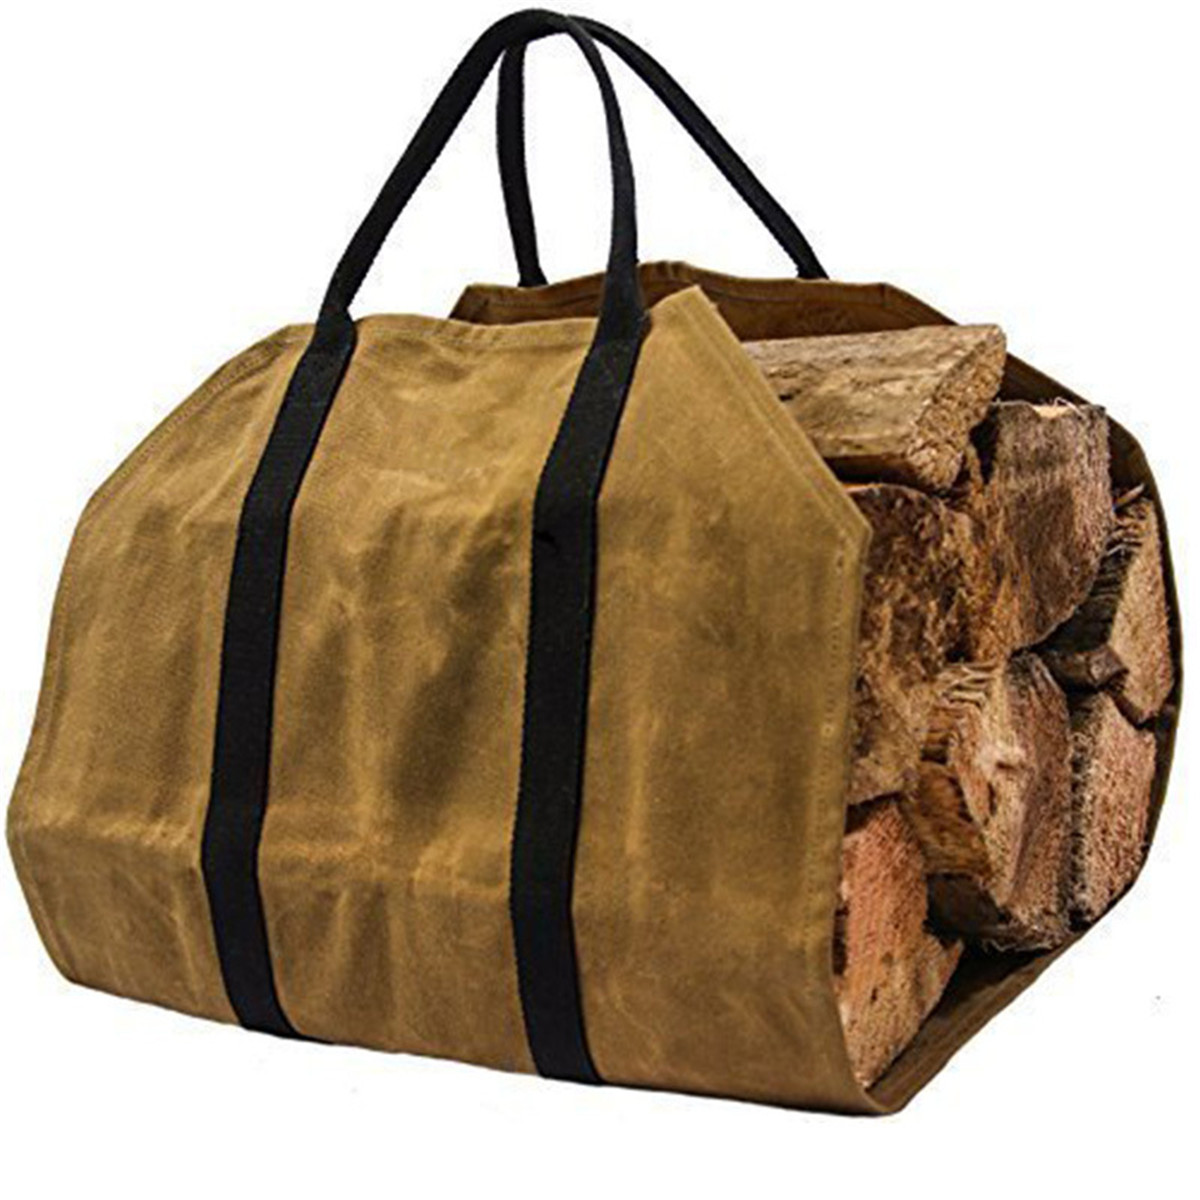 

khaki Firewood Carrier Log Carrier Wood Carrying Bag for Fireplace 16oz Waxed Canvas